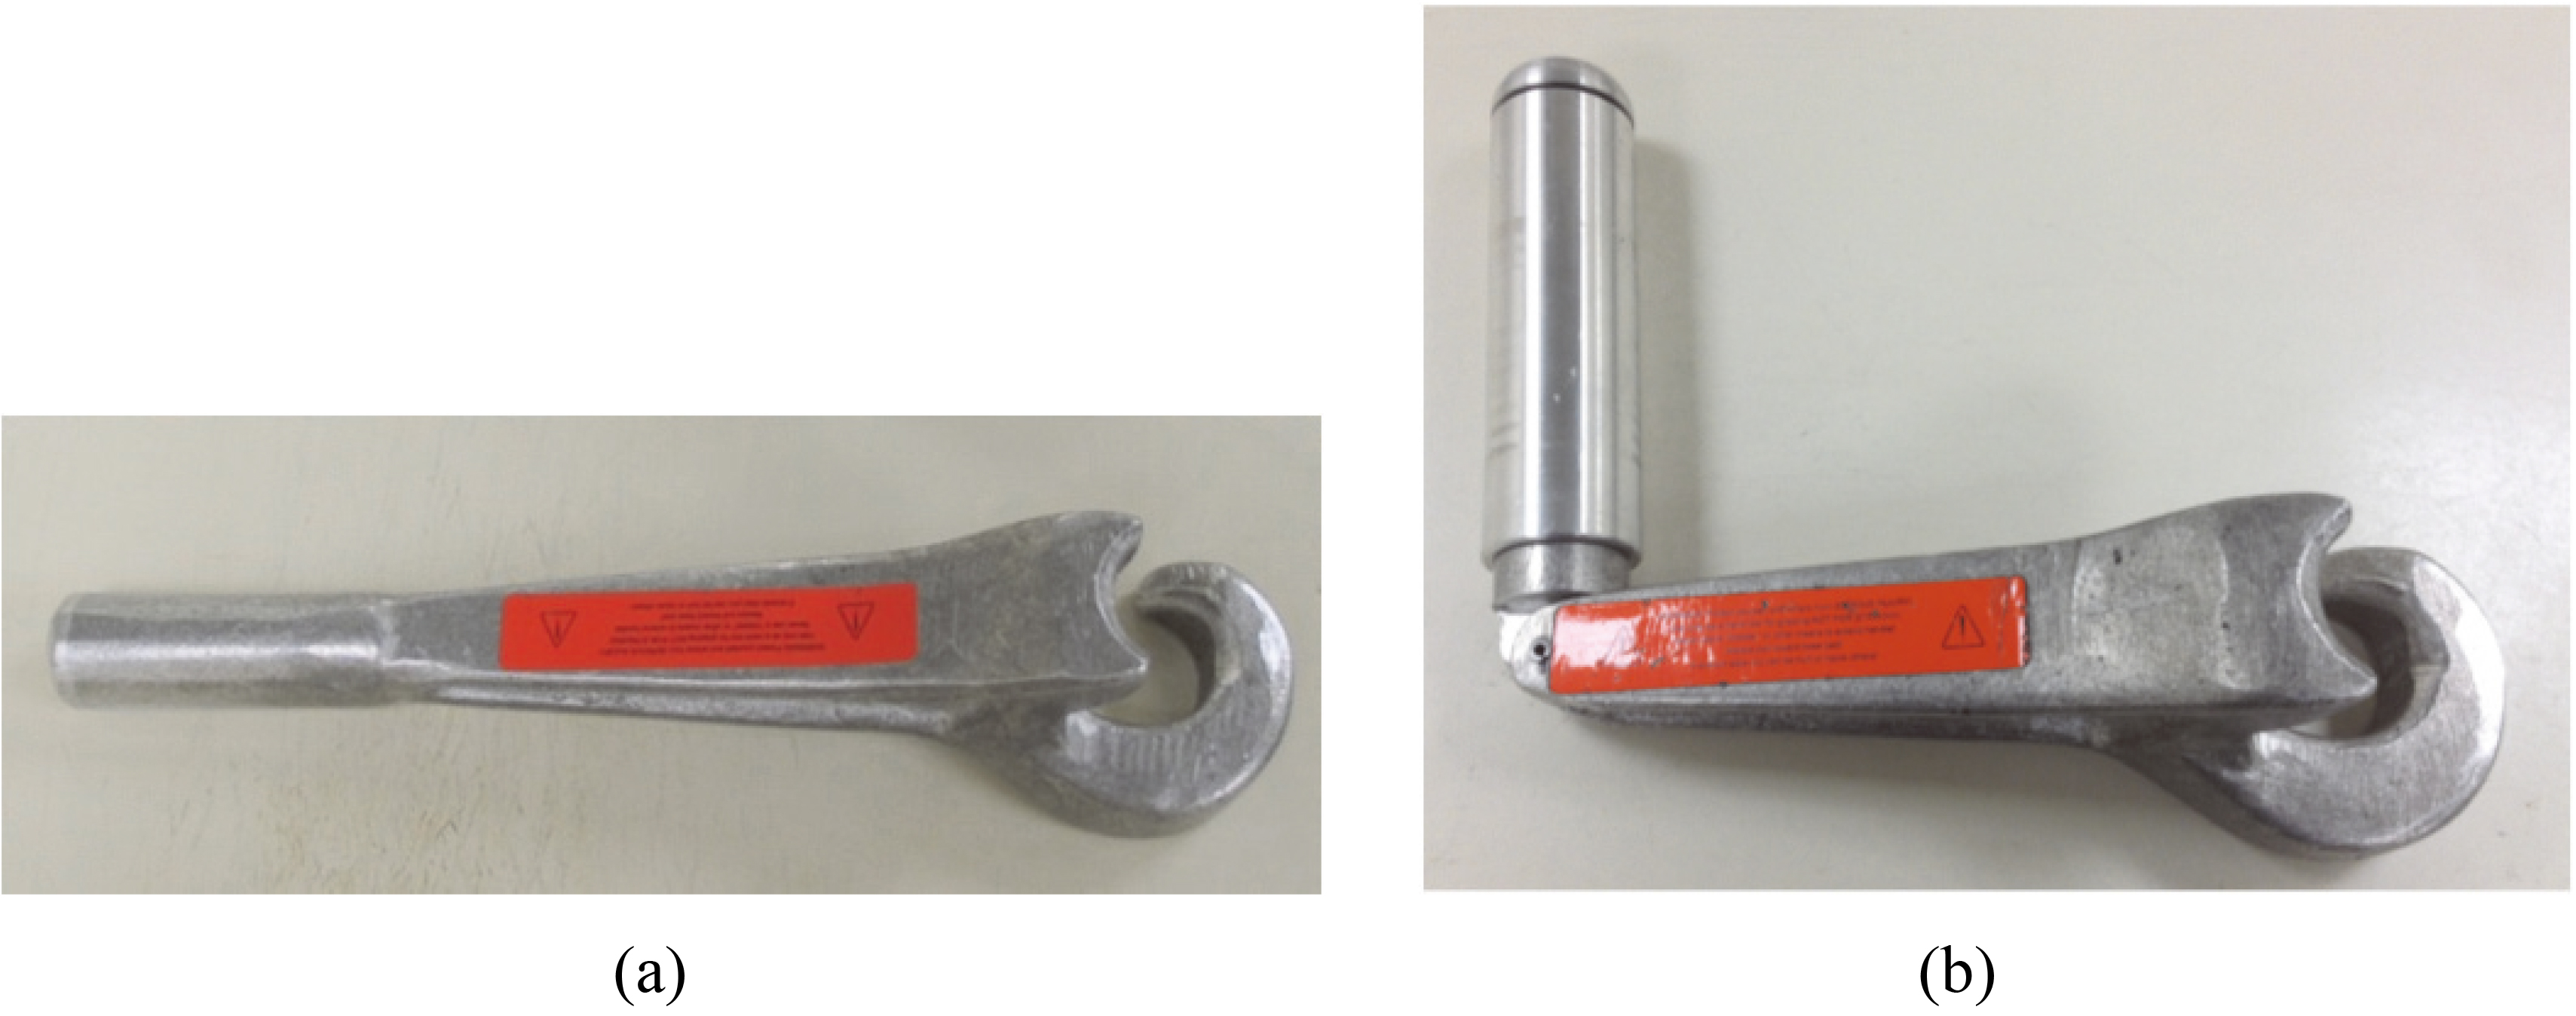 (a) Conventional valve-wrench; and (b) Ergonomically modified valve-wrench.